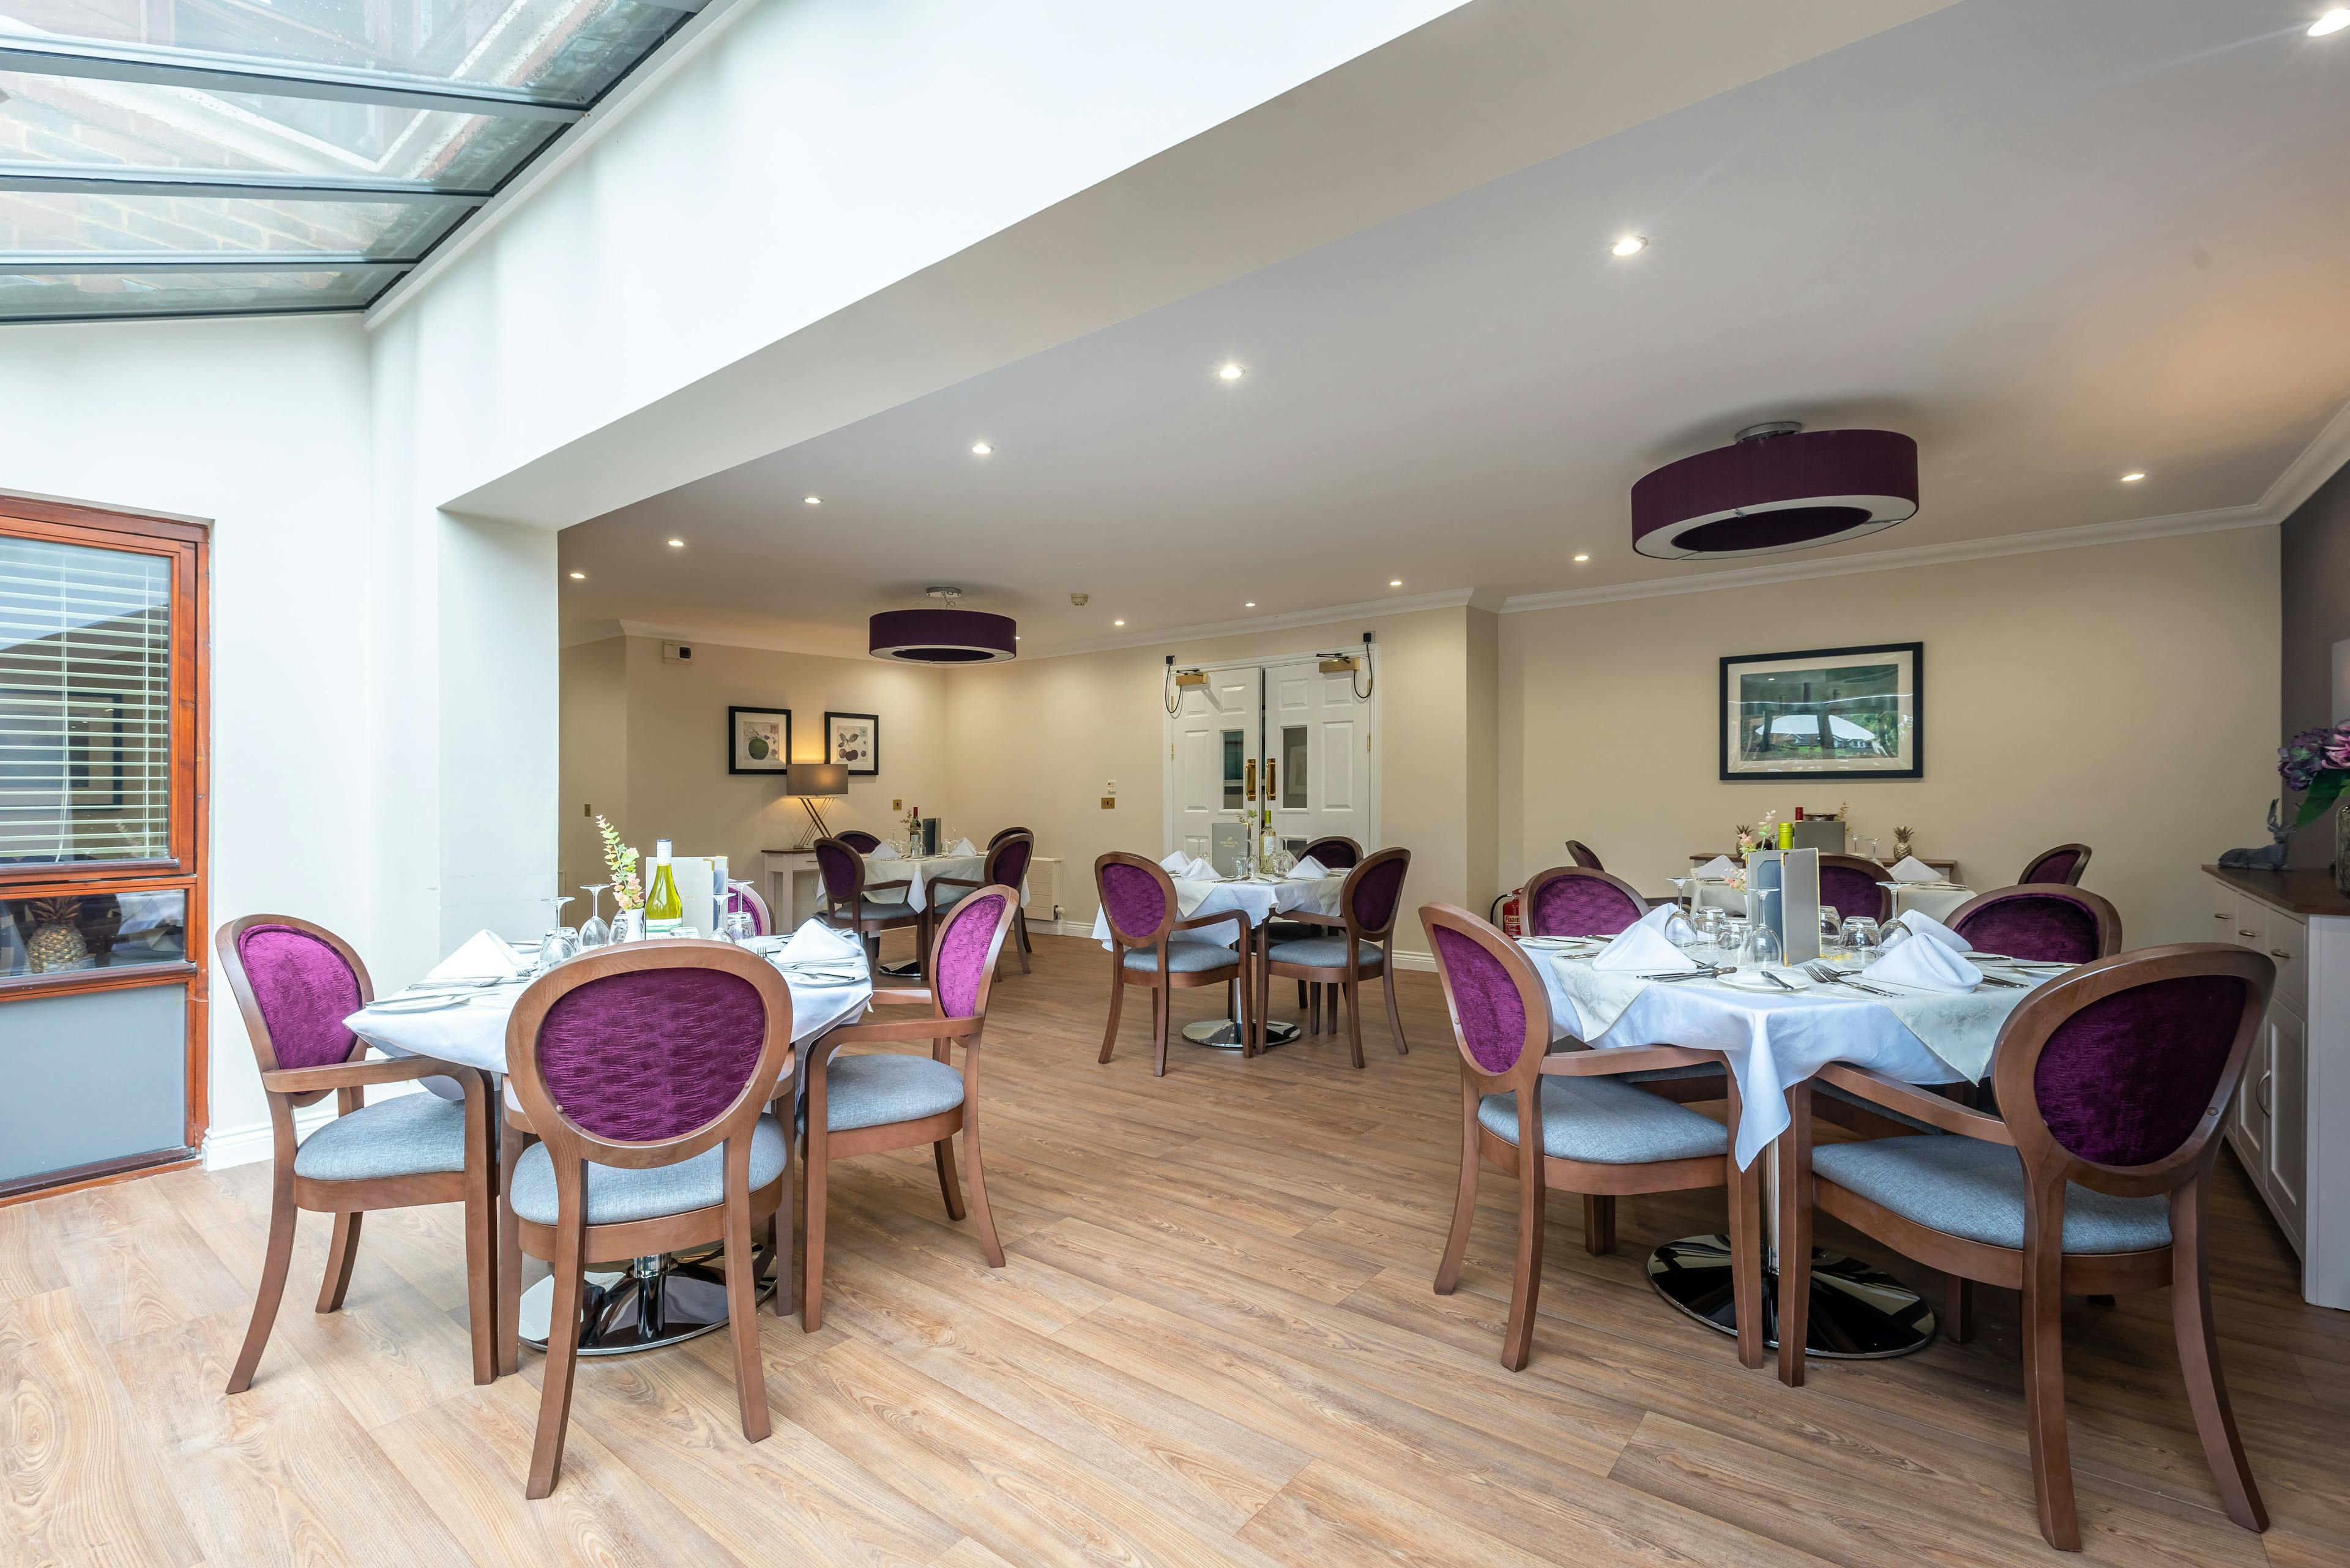 Dining Room at Tandridge Heights Care Home in Oxted, Surrey